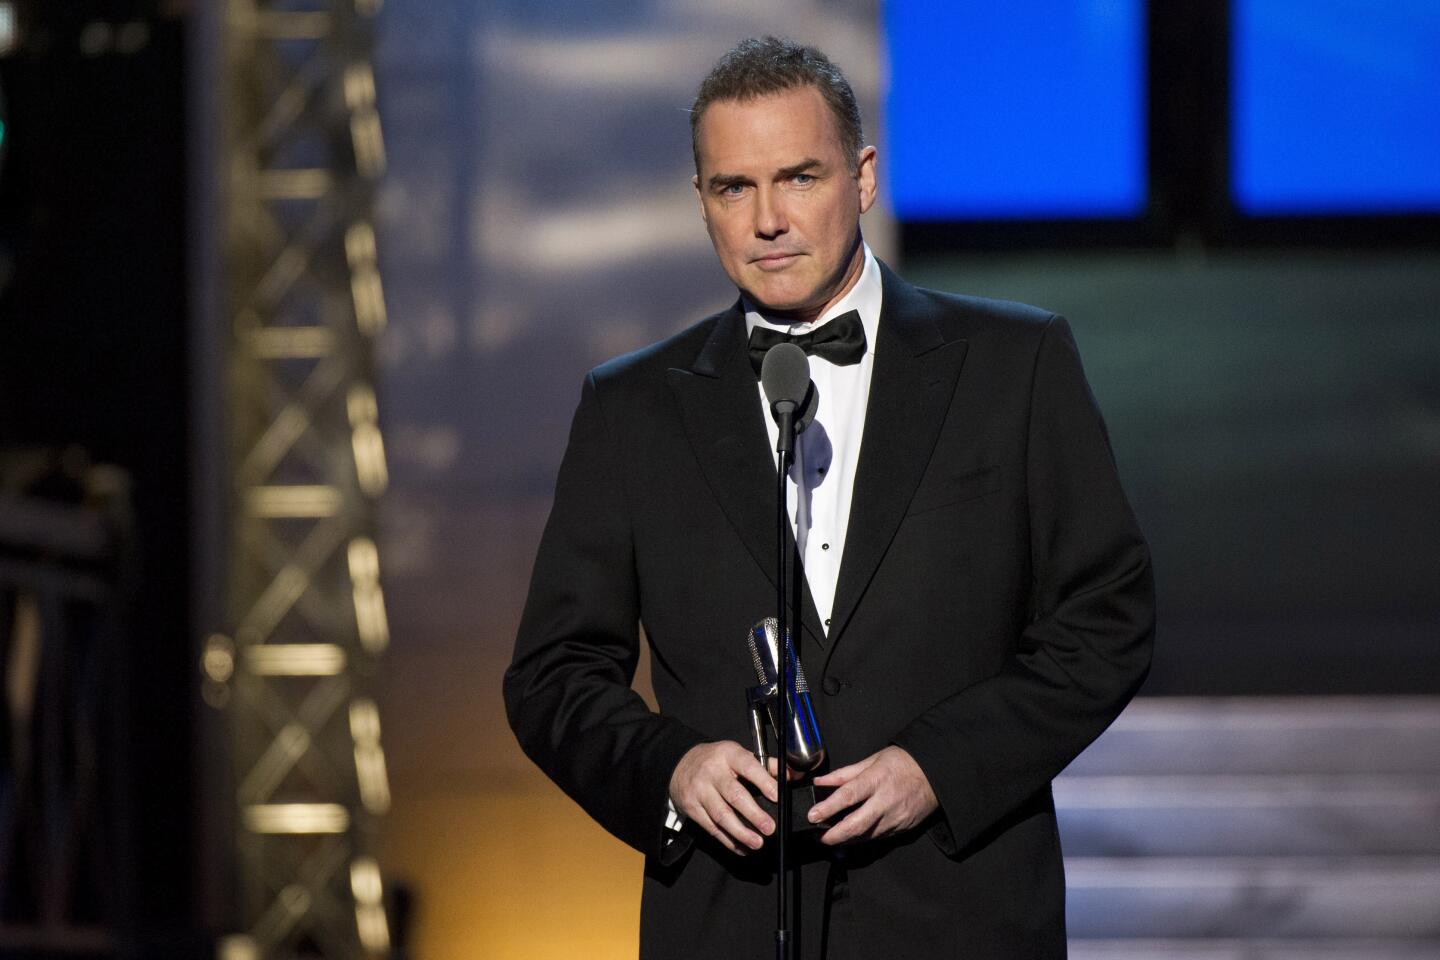 Comedian Norm Macdonald, best known as a writer, performer and three-season “Weekend Update” anchor on “Saturday Night Live,” died at 61. Macdonald emerged in more recent years on social media as a sports fanatic, live-tweeting golf tournaments in exquisite detail and amassing 1.1 million followers on Twitter.